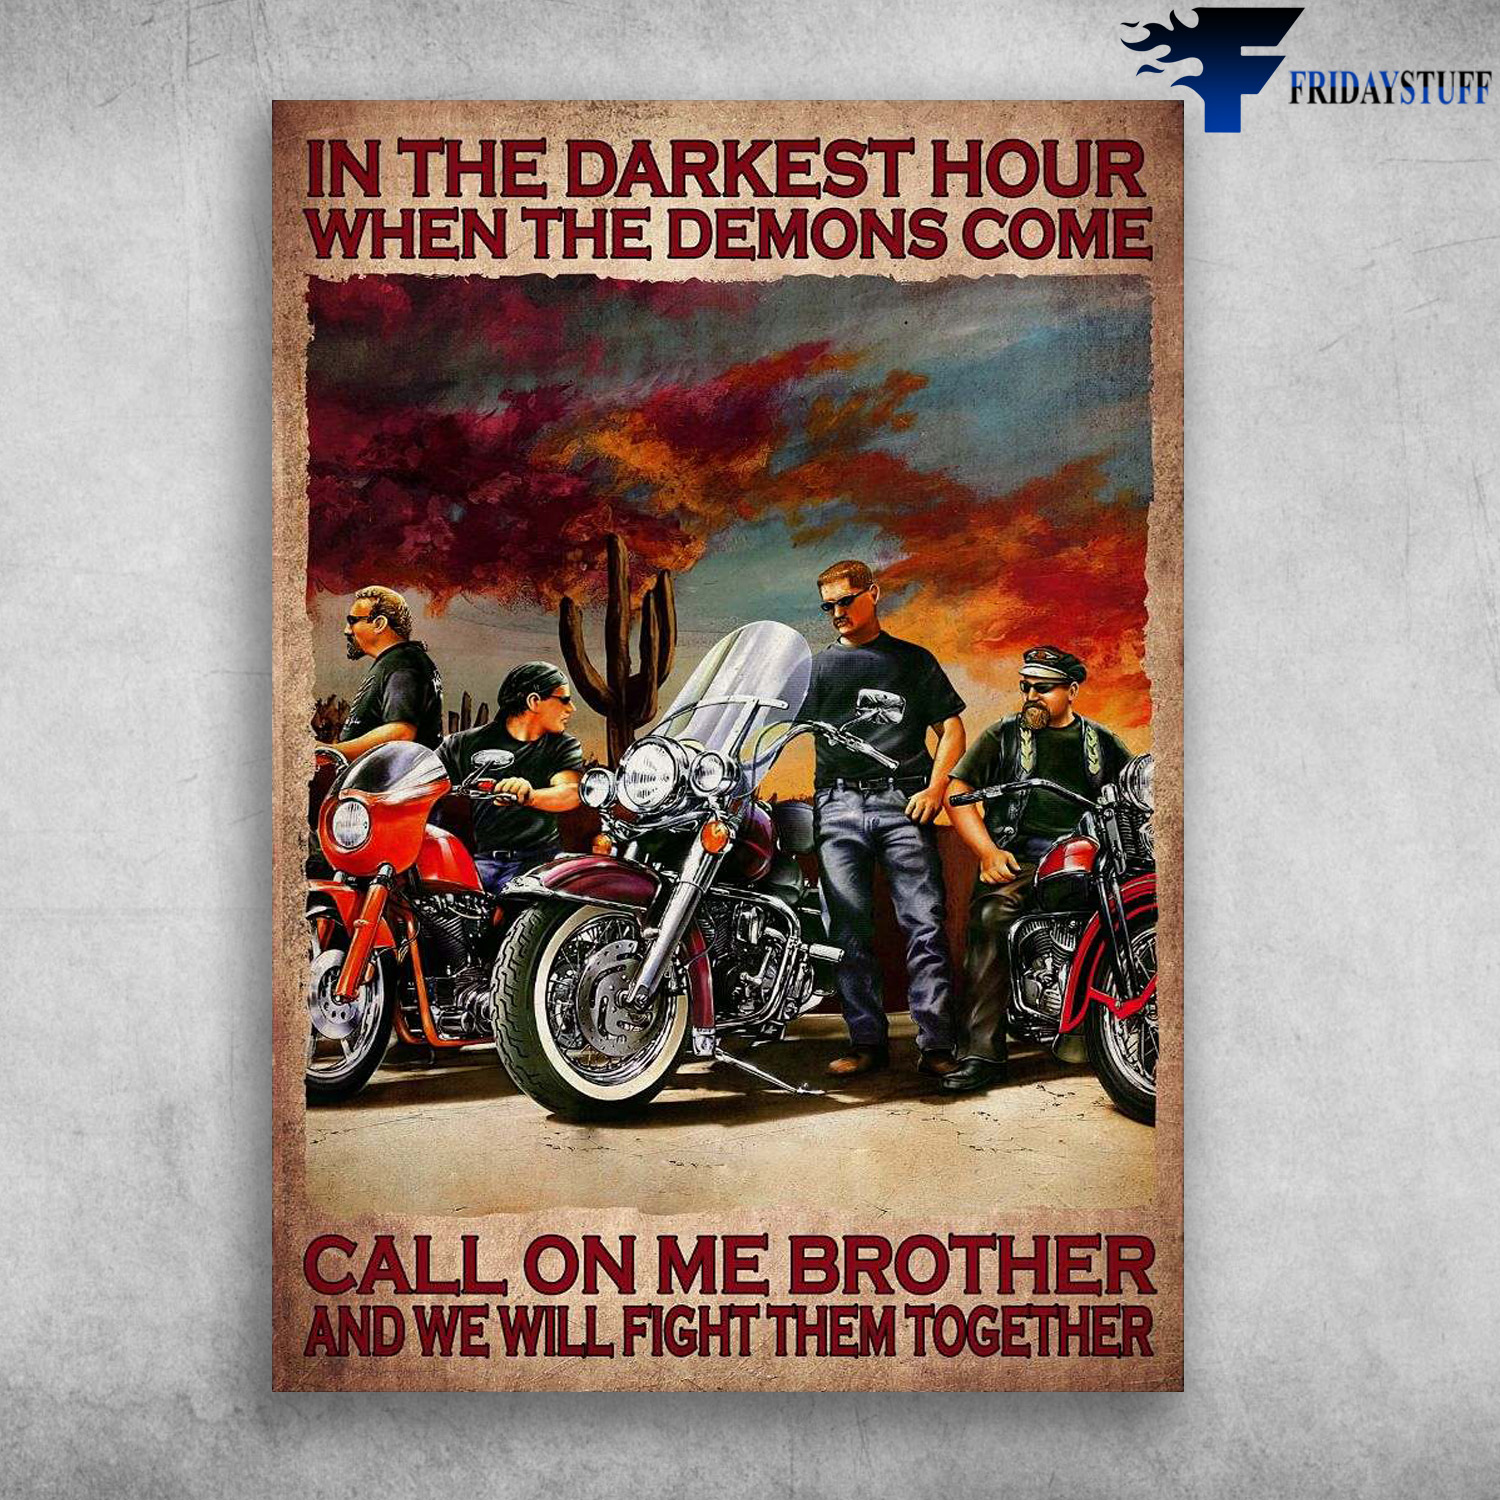 Racing Club, Motorcycle Lover - In The Darkness Hour, When The Demons Come, Call On Me Brother, And We Will Fight Them Together